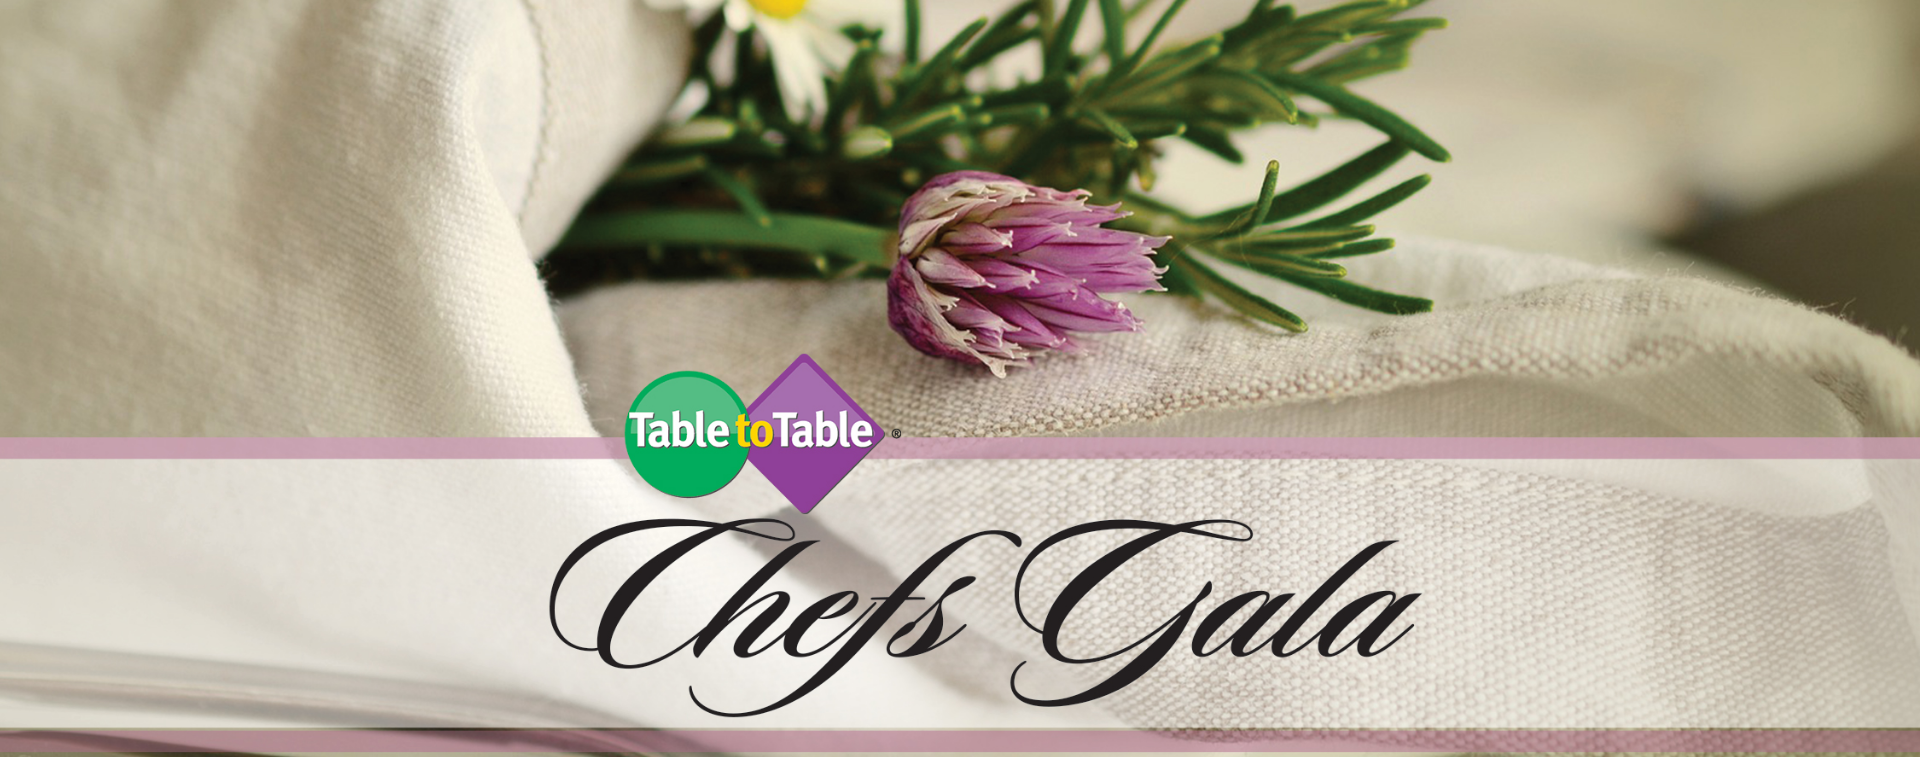 Table to Table Announces its 2023 Chefs Gala Honoree: Chef, Restaurateur, Author, and Community Advocate, Melba Wilson